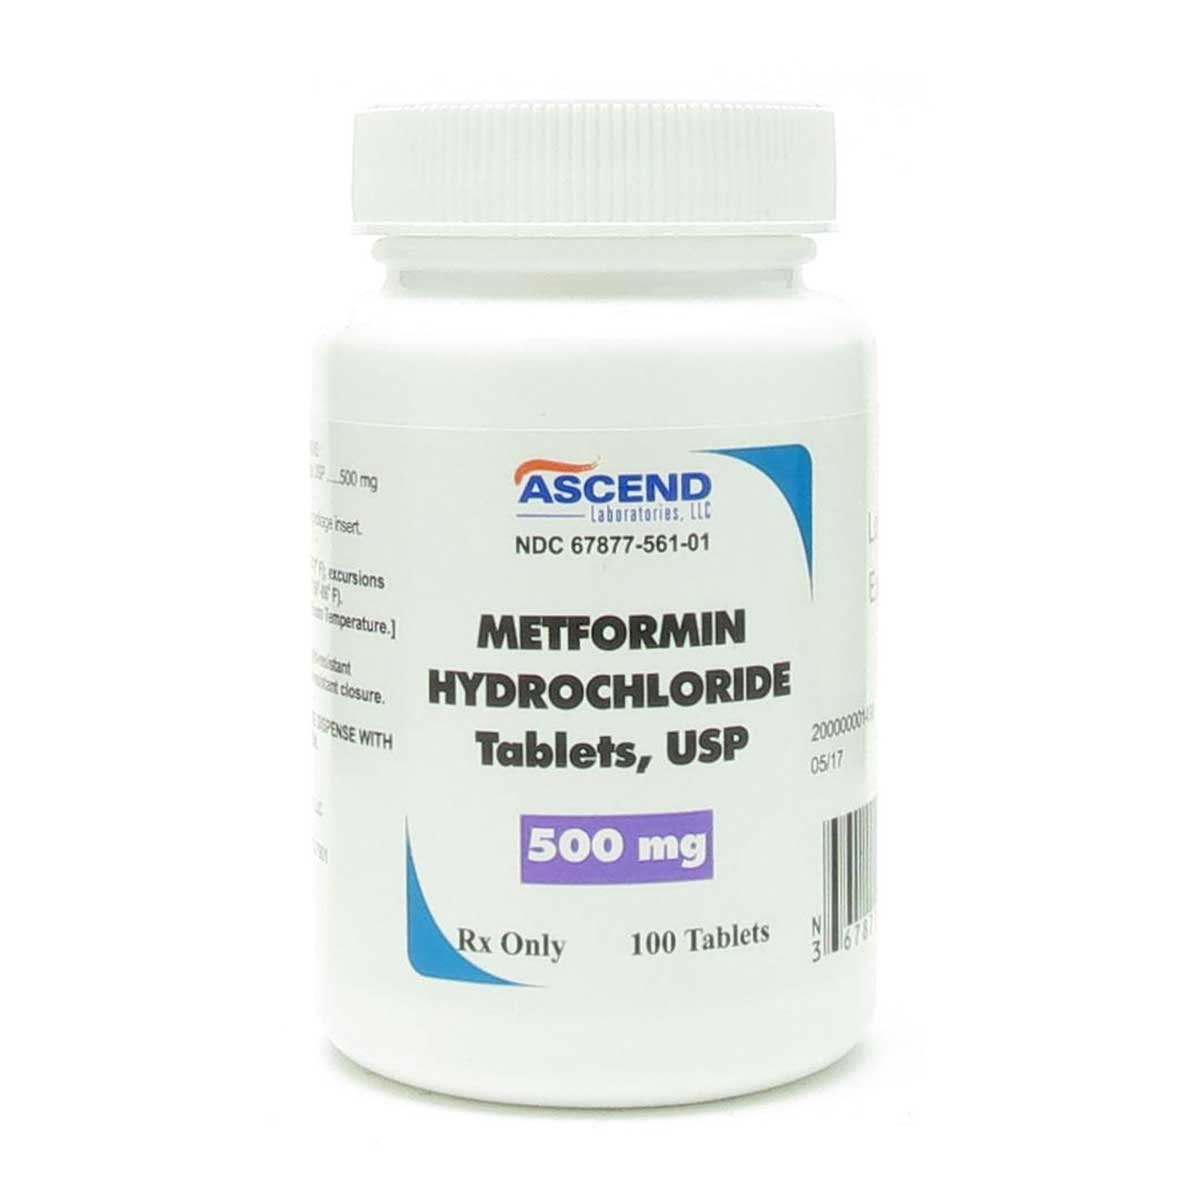 In type 2 diabetes patients, this study found no evidence to support a link between metformin use and increased risk of AMD.